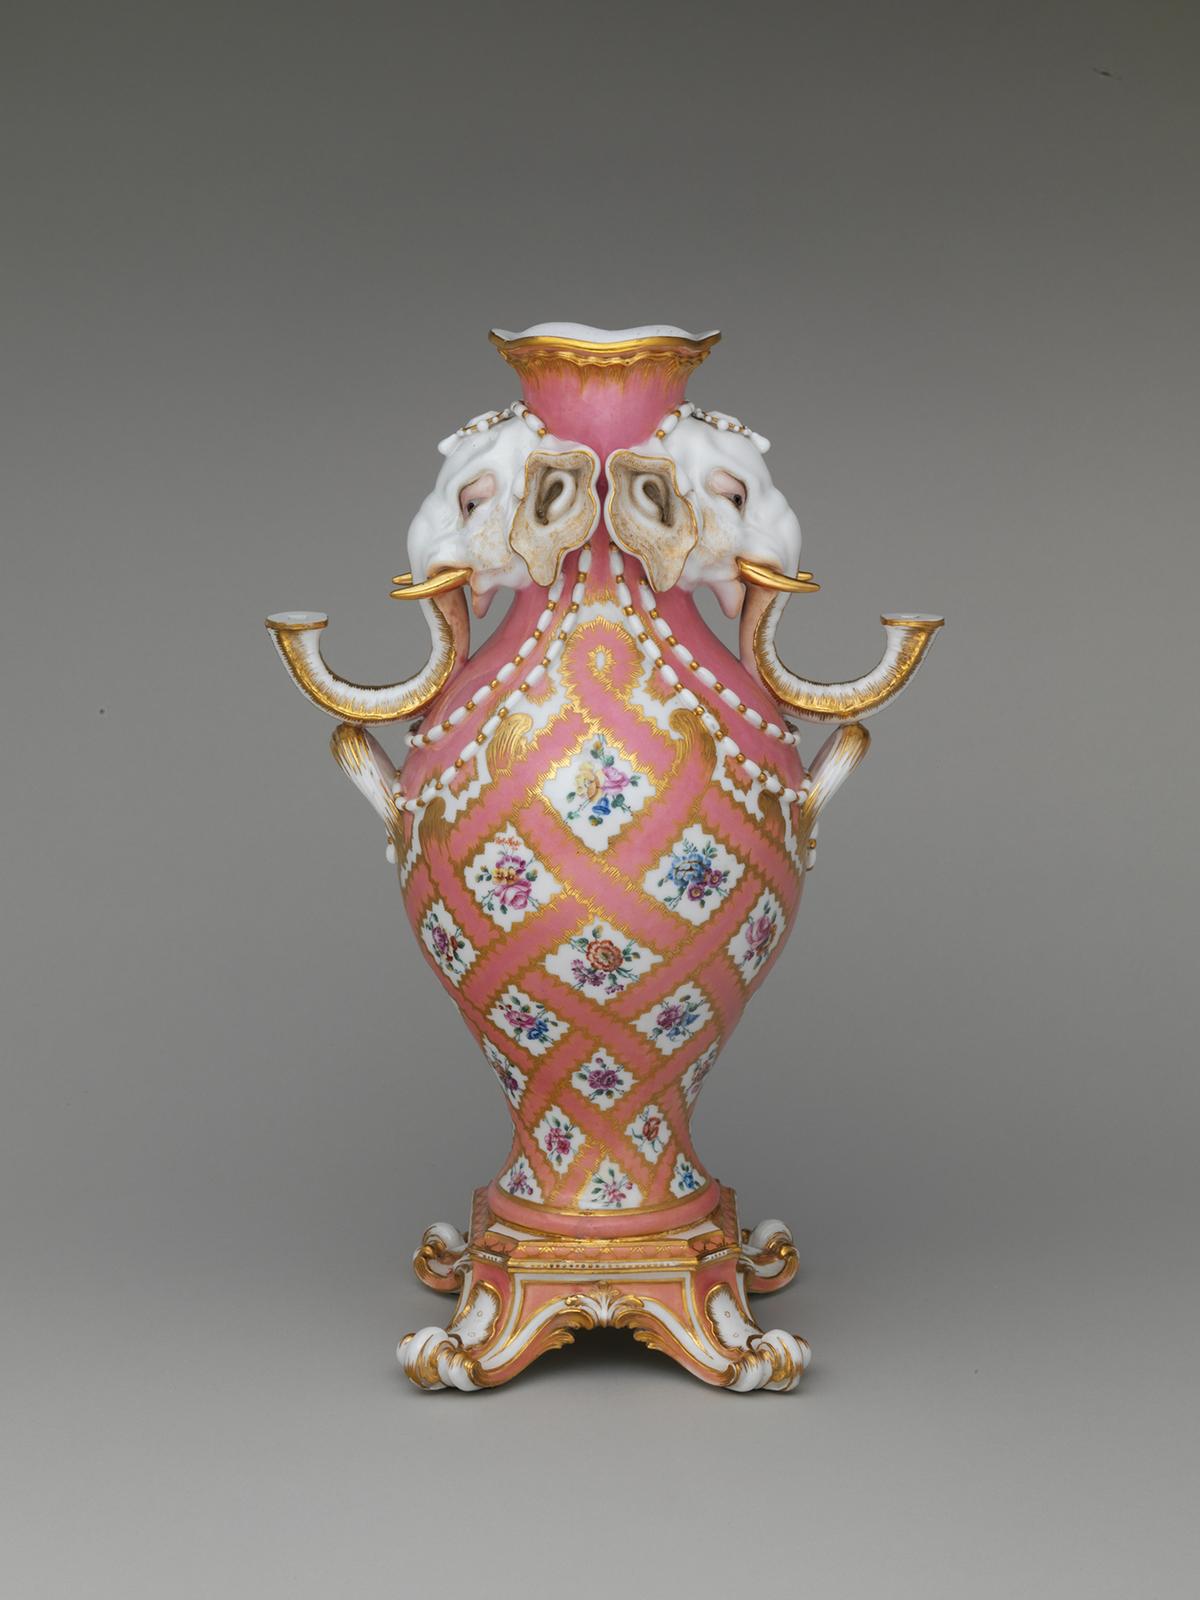 A vase with elephant heads (one of a pair), circa 1758, by Jean-Claude Duplessis from the Sèvres Manufactory. The Metropolitan Museum of Art, New York City. (Public Domain)